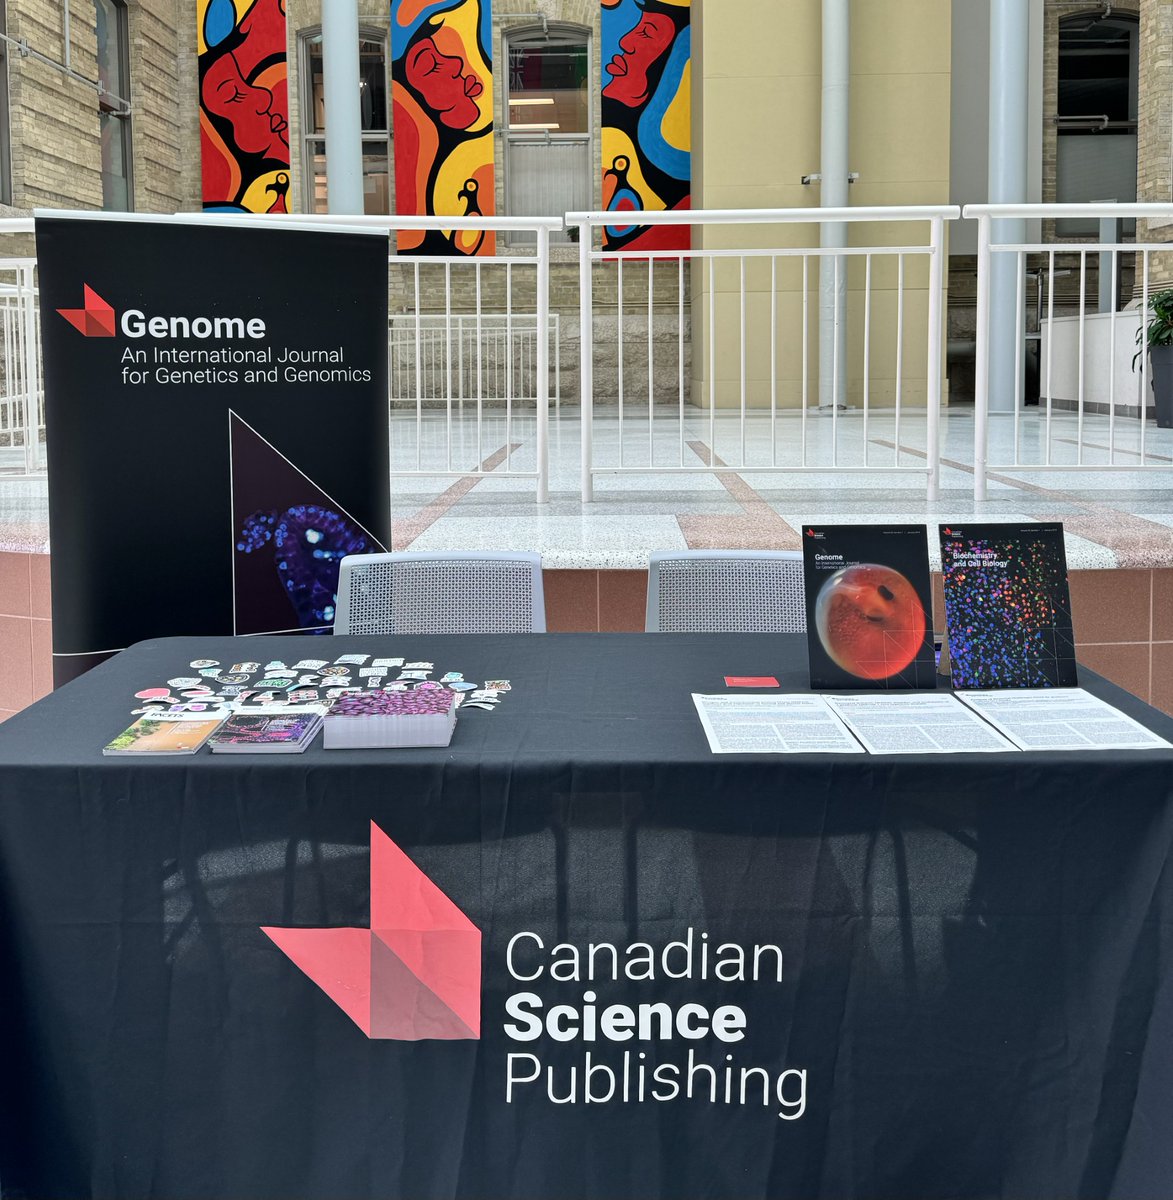 🔥 We made it to #CSMB2024! 🔬 Come check out #BiochemistryandCellBiology, #Genome, @FACETSJournal! Come grab stickers, postcards, and much more! 🌟 @CSMB_SCMB @CSMB2024 @CSMB_trainees #ScienceSwag'